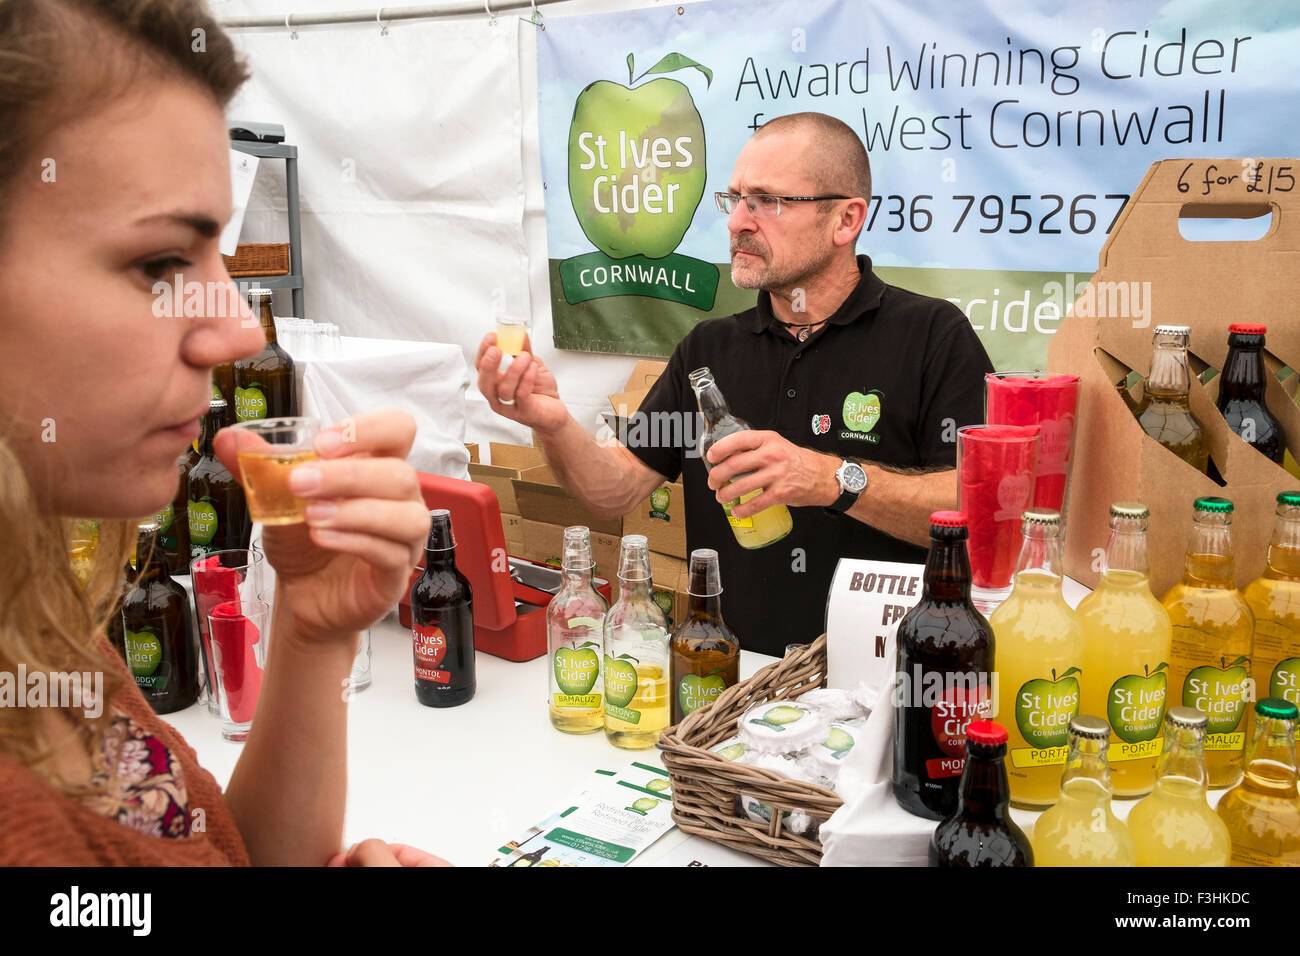 A cider tasting event at a farmers market in Truro, Cornwall, UK Stock Photo